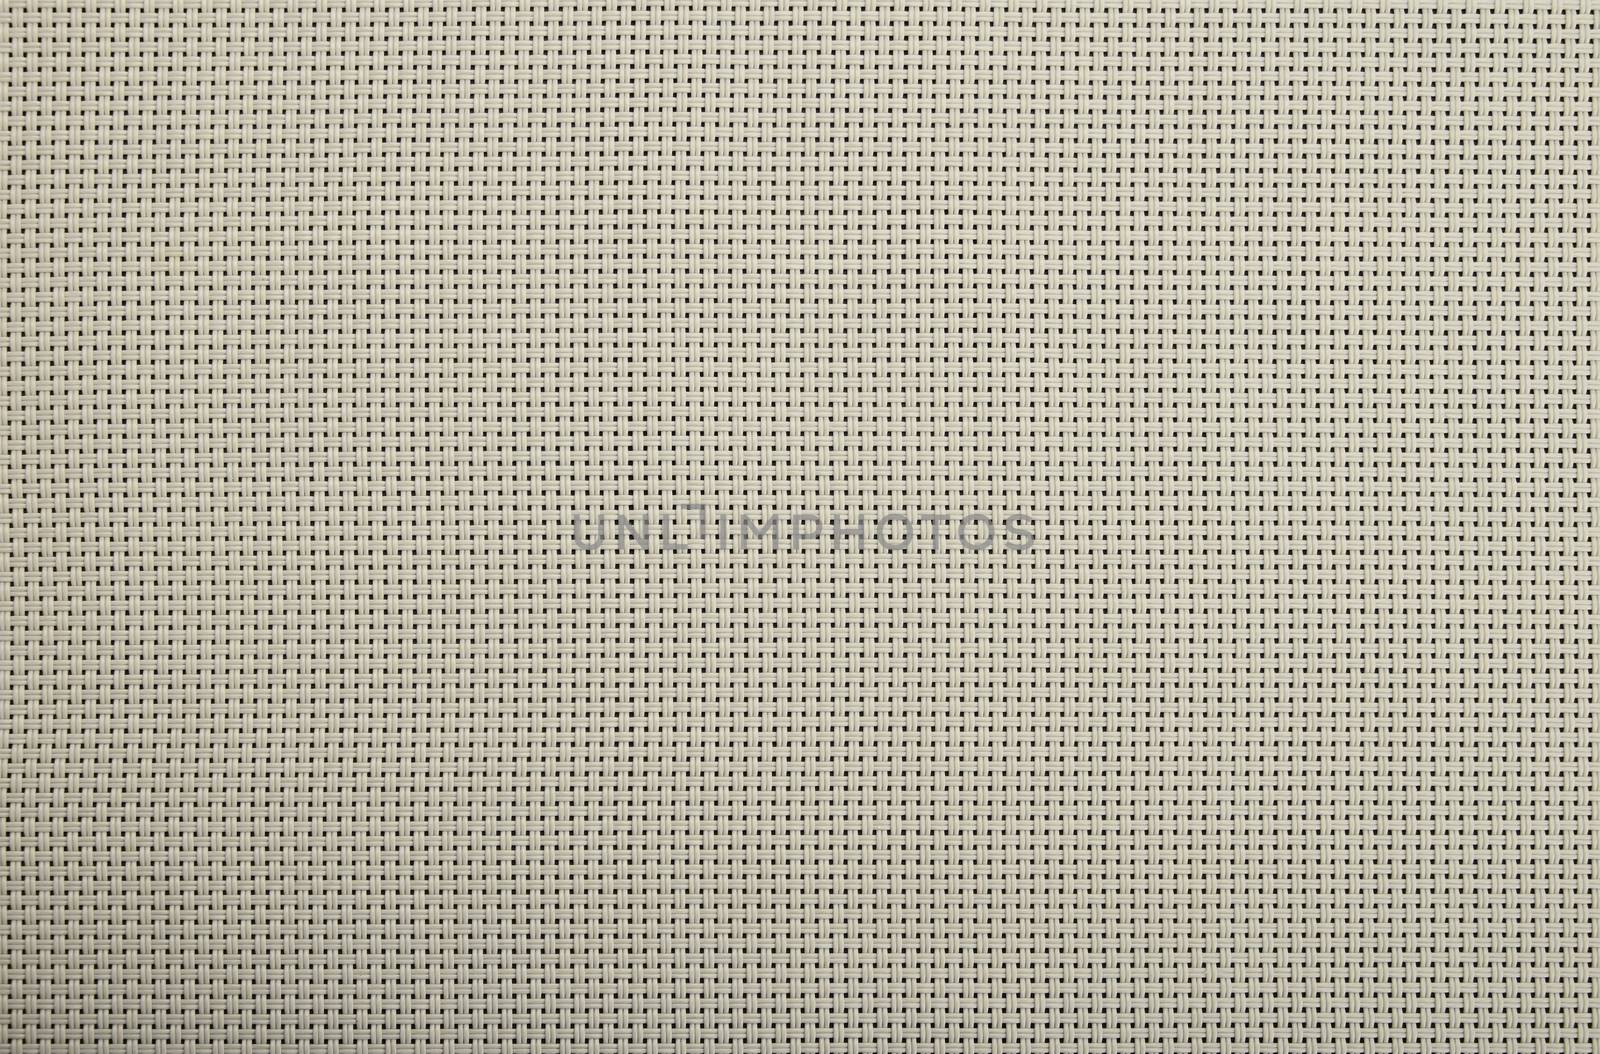 Background texture of grey wicker braided plastic double strings by BreakingTheWalls